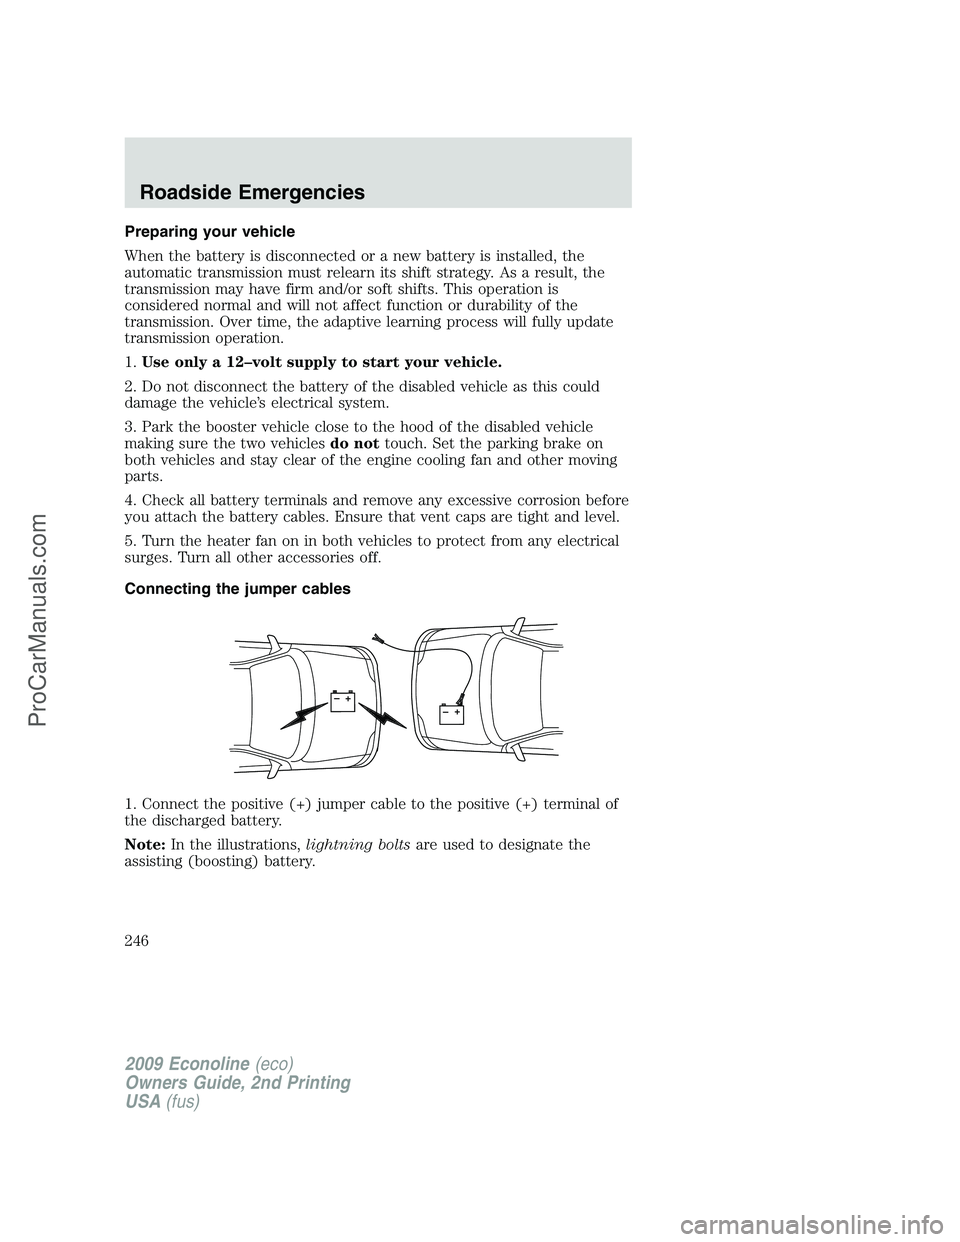 FORD ECONOLINE 2009  Owners Manual Preparing your vehicle
When the battery is disconnected or a new battery is installed, the
automatic transmission must relearn its shift strategy. As a result, the
transmission may have firm and/or so